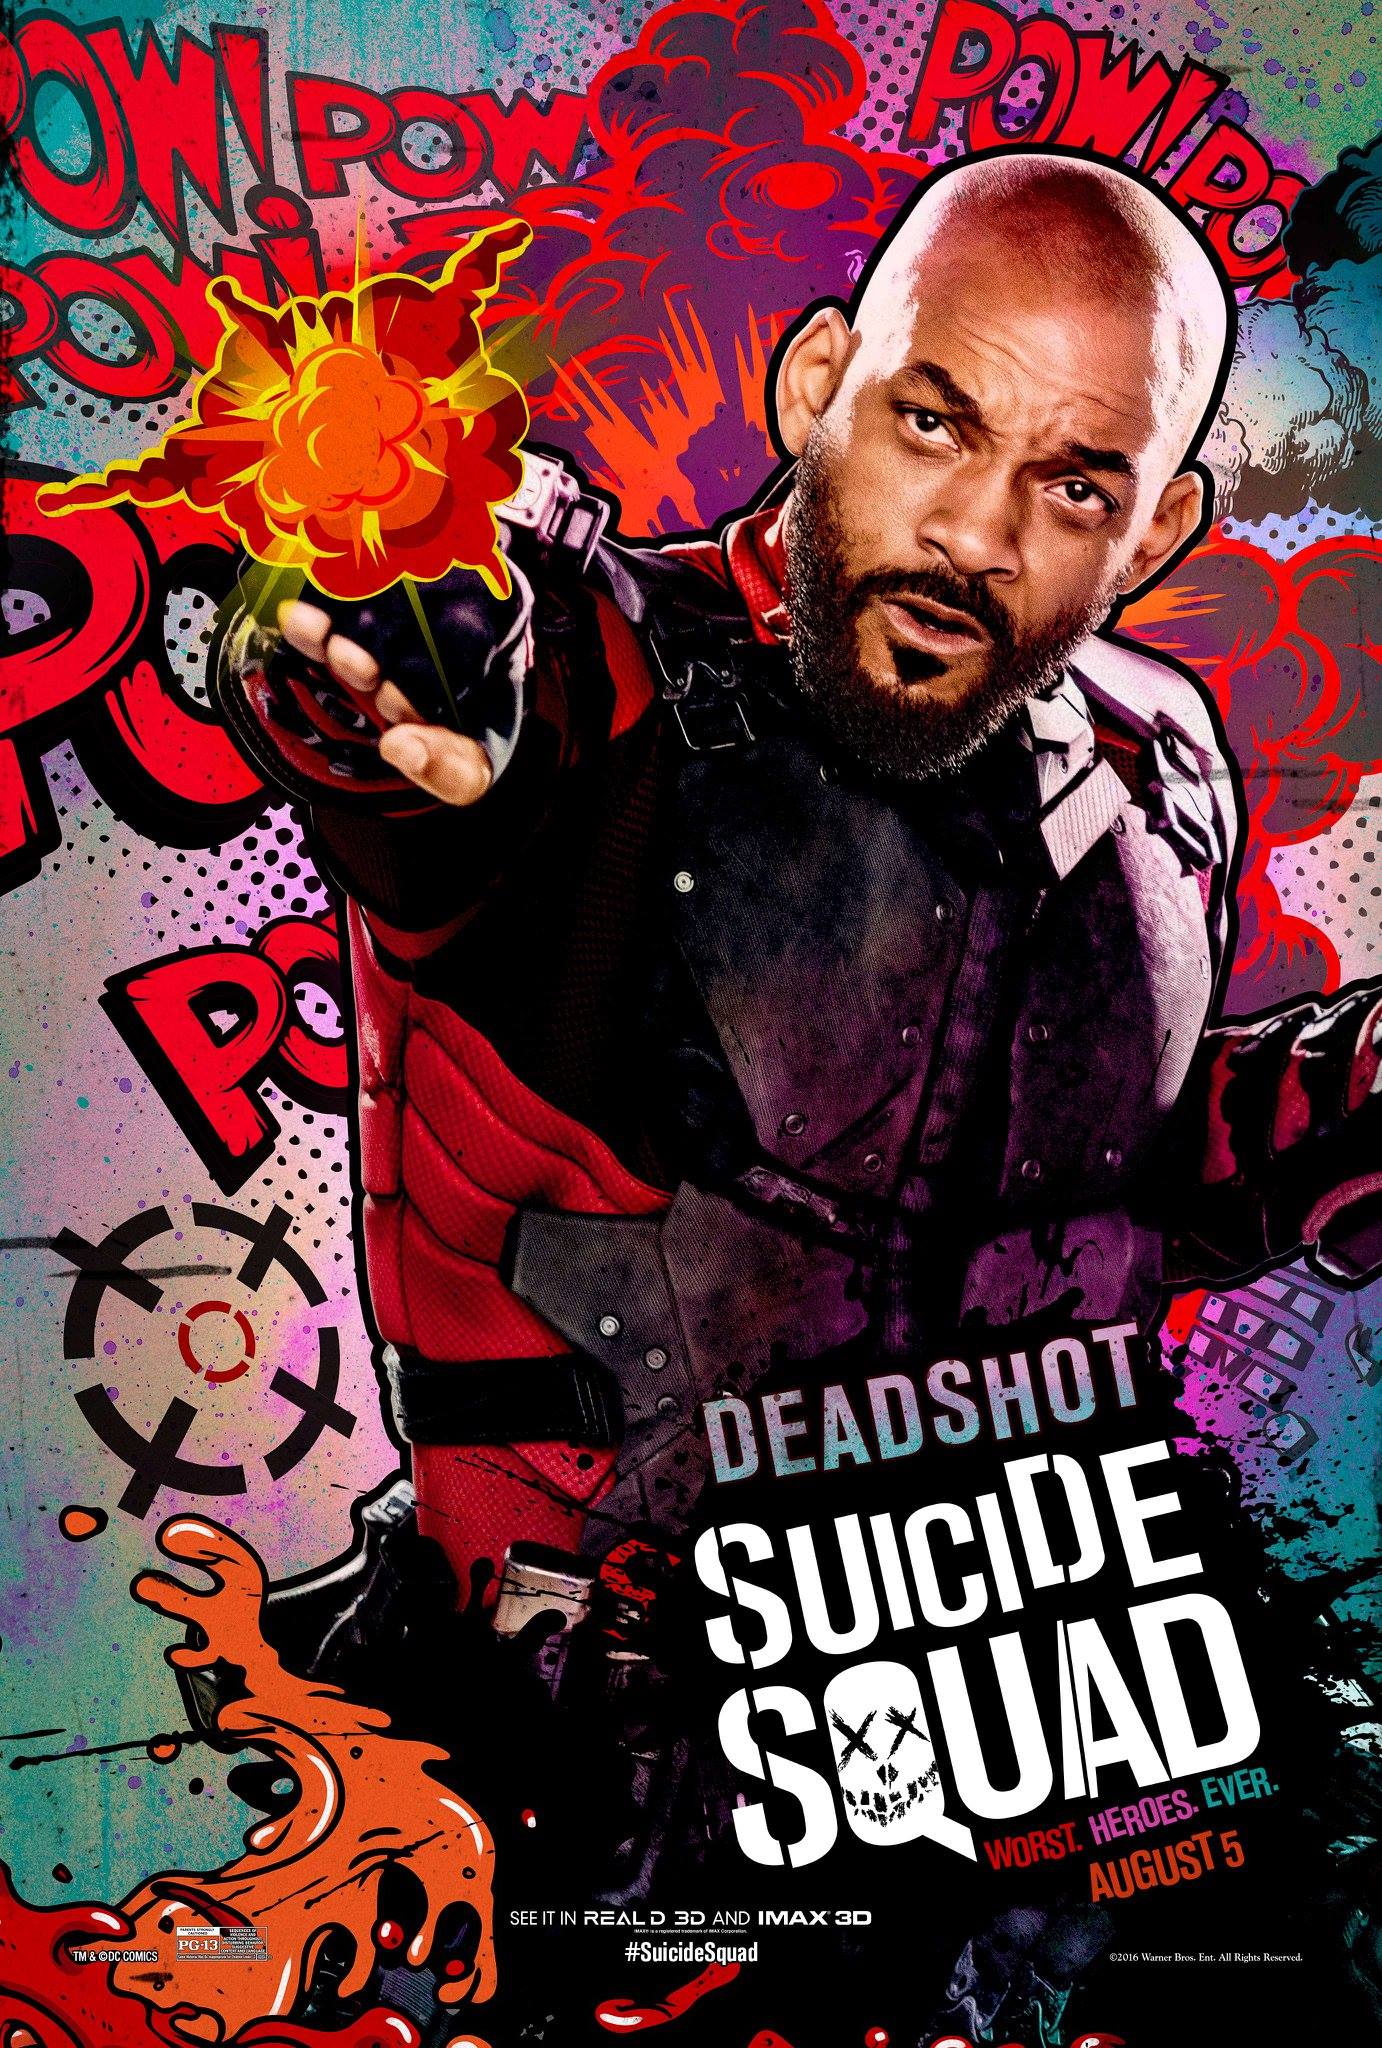 Deadshot from Suicide Squad.